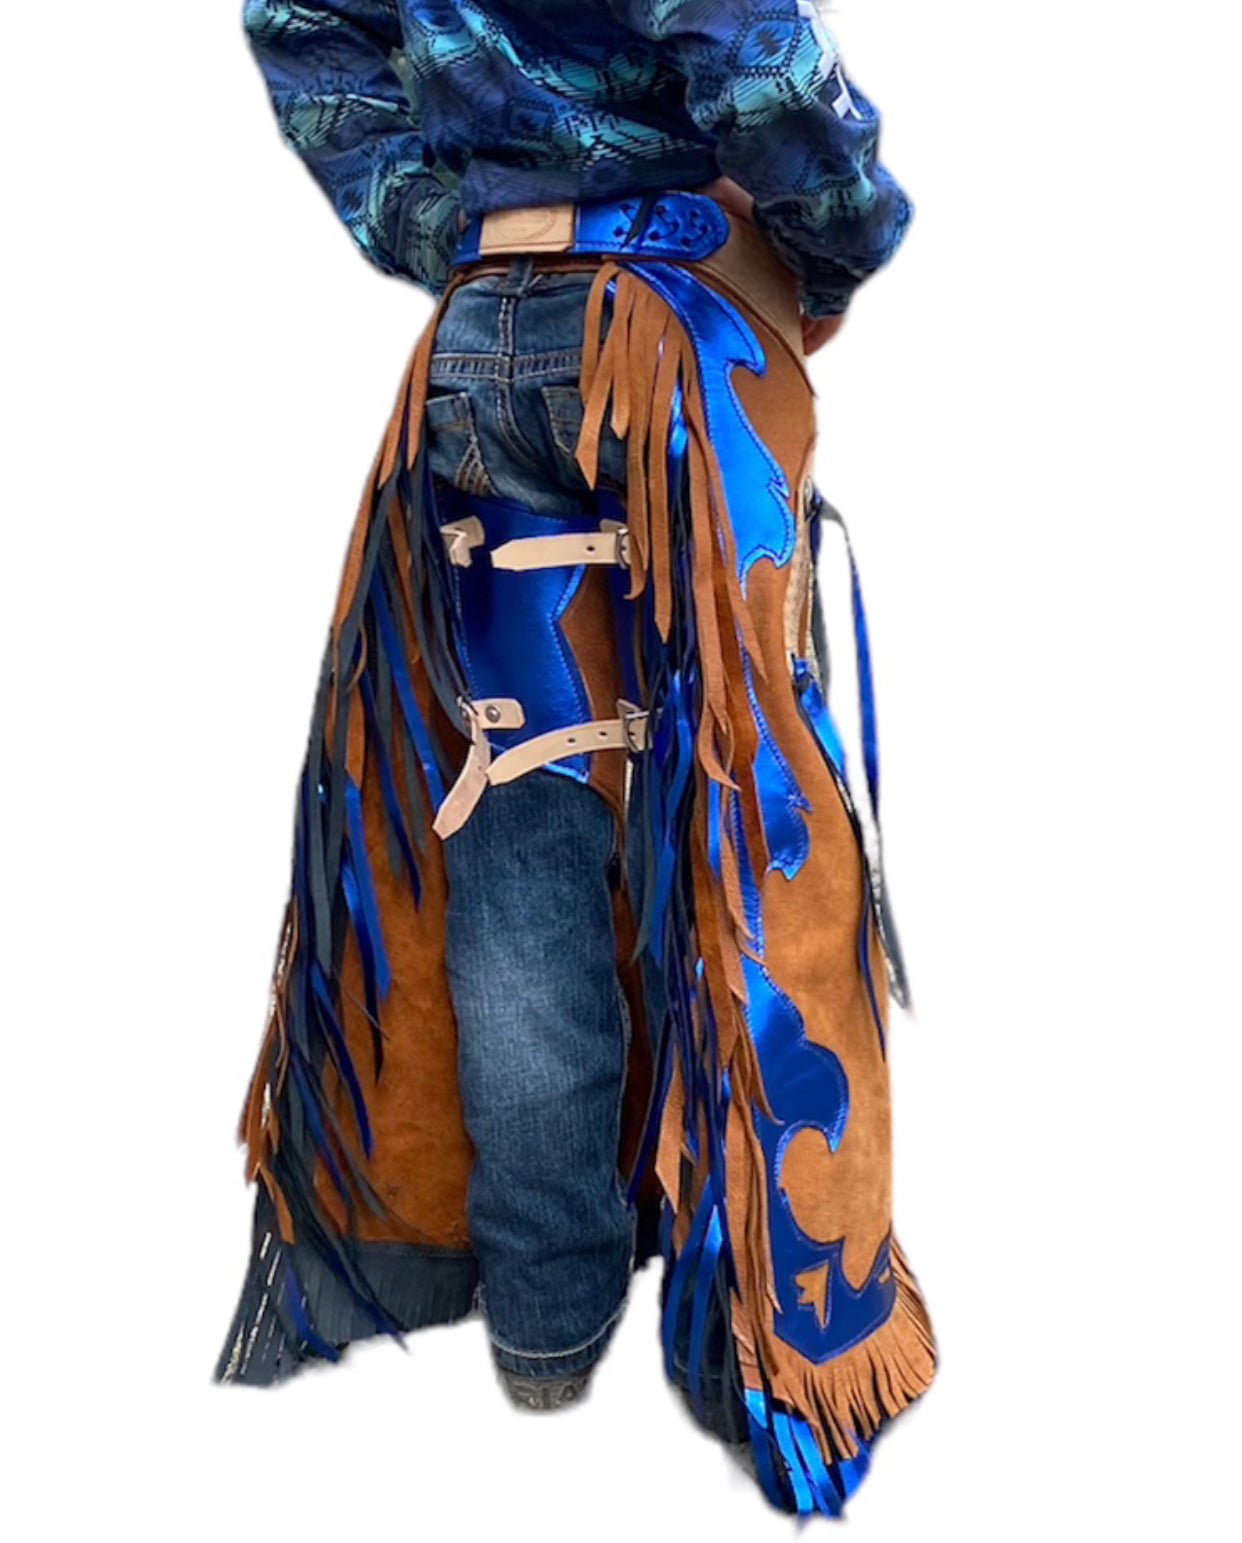 T5533 - Kids Chaps Size 6-8 years